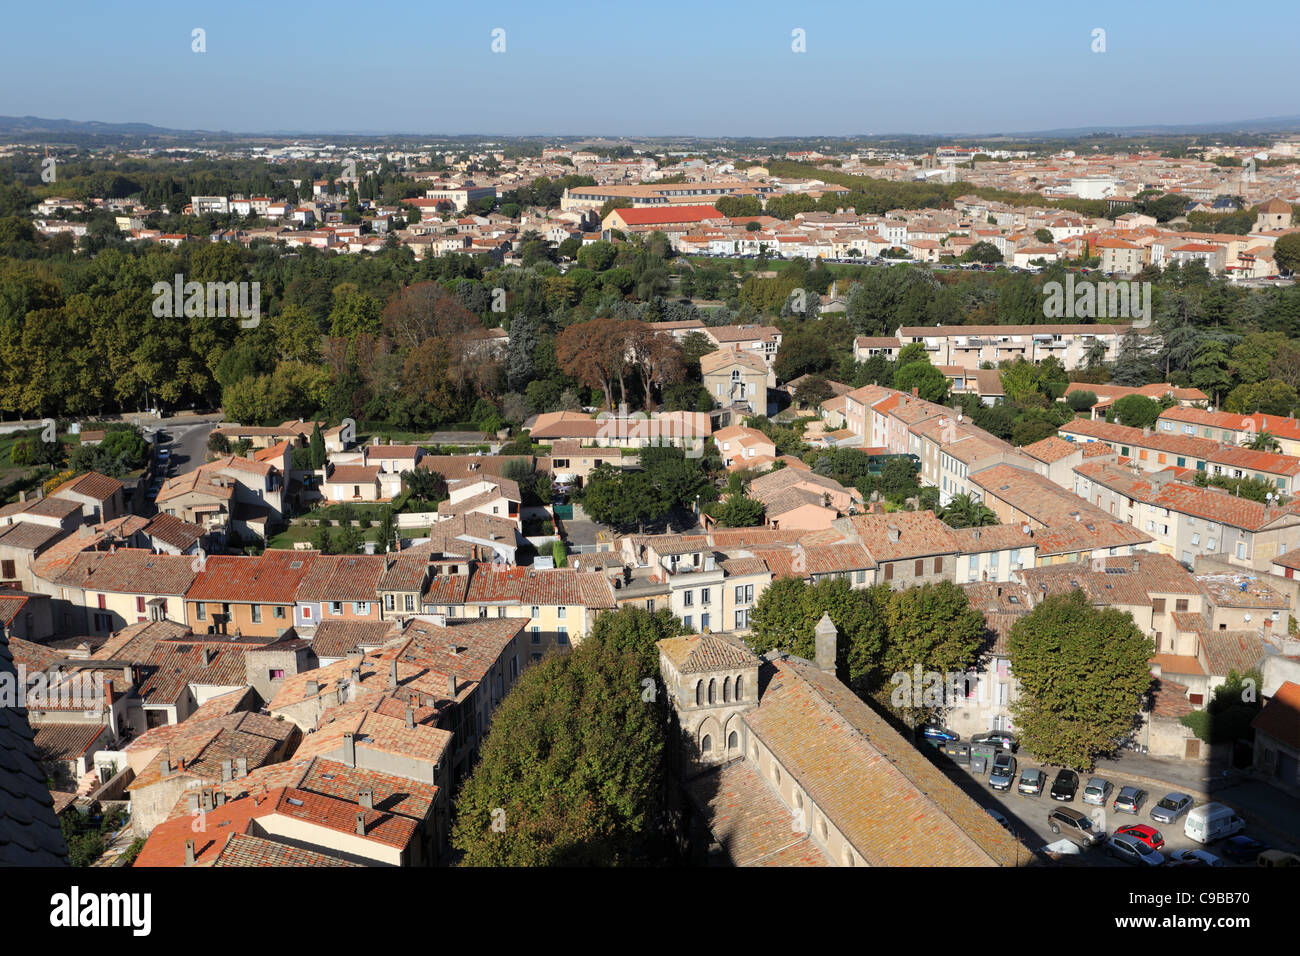 View over the city of Carcassonne, France Stock Photo